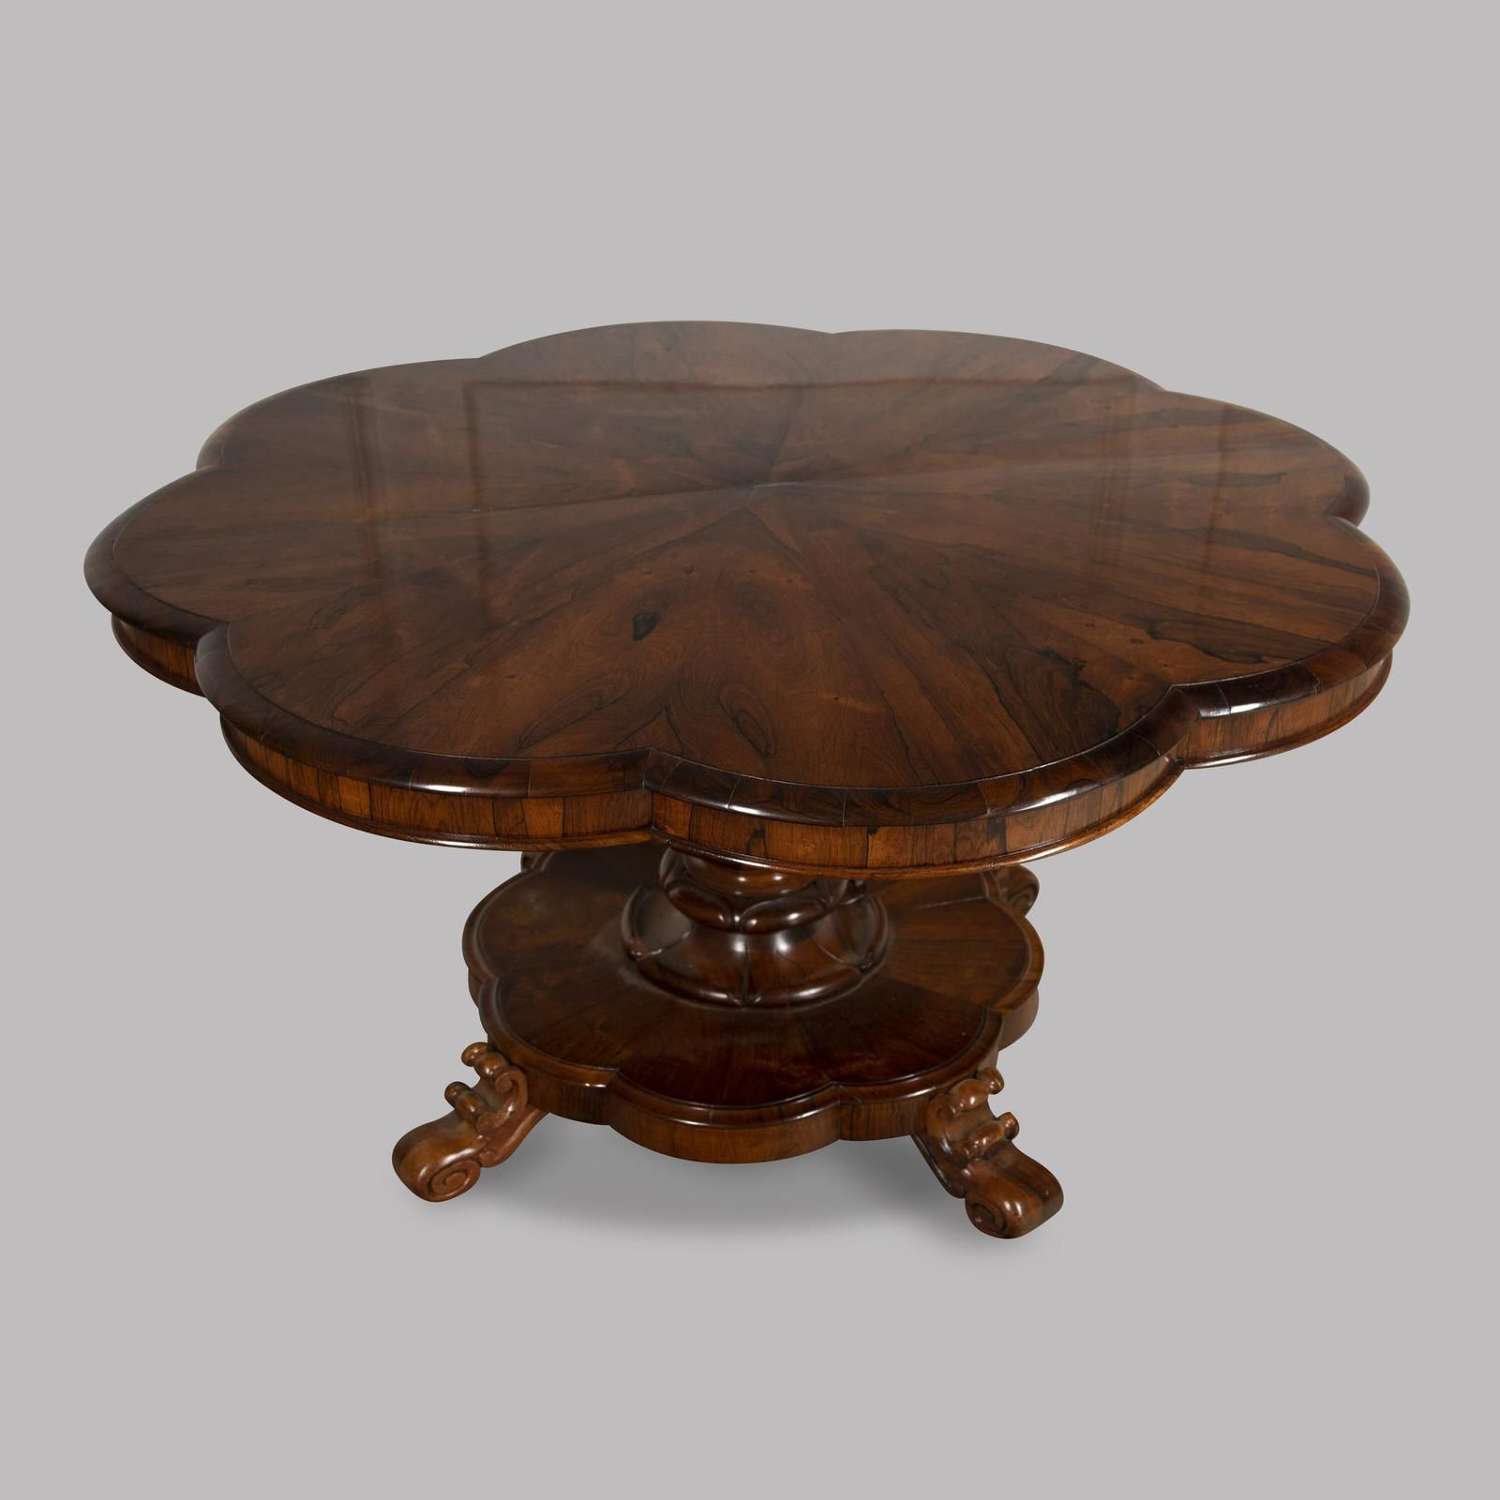 Mid 19th Century English Scalloped Rosewood Table